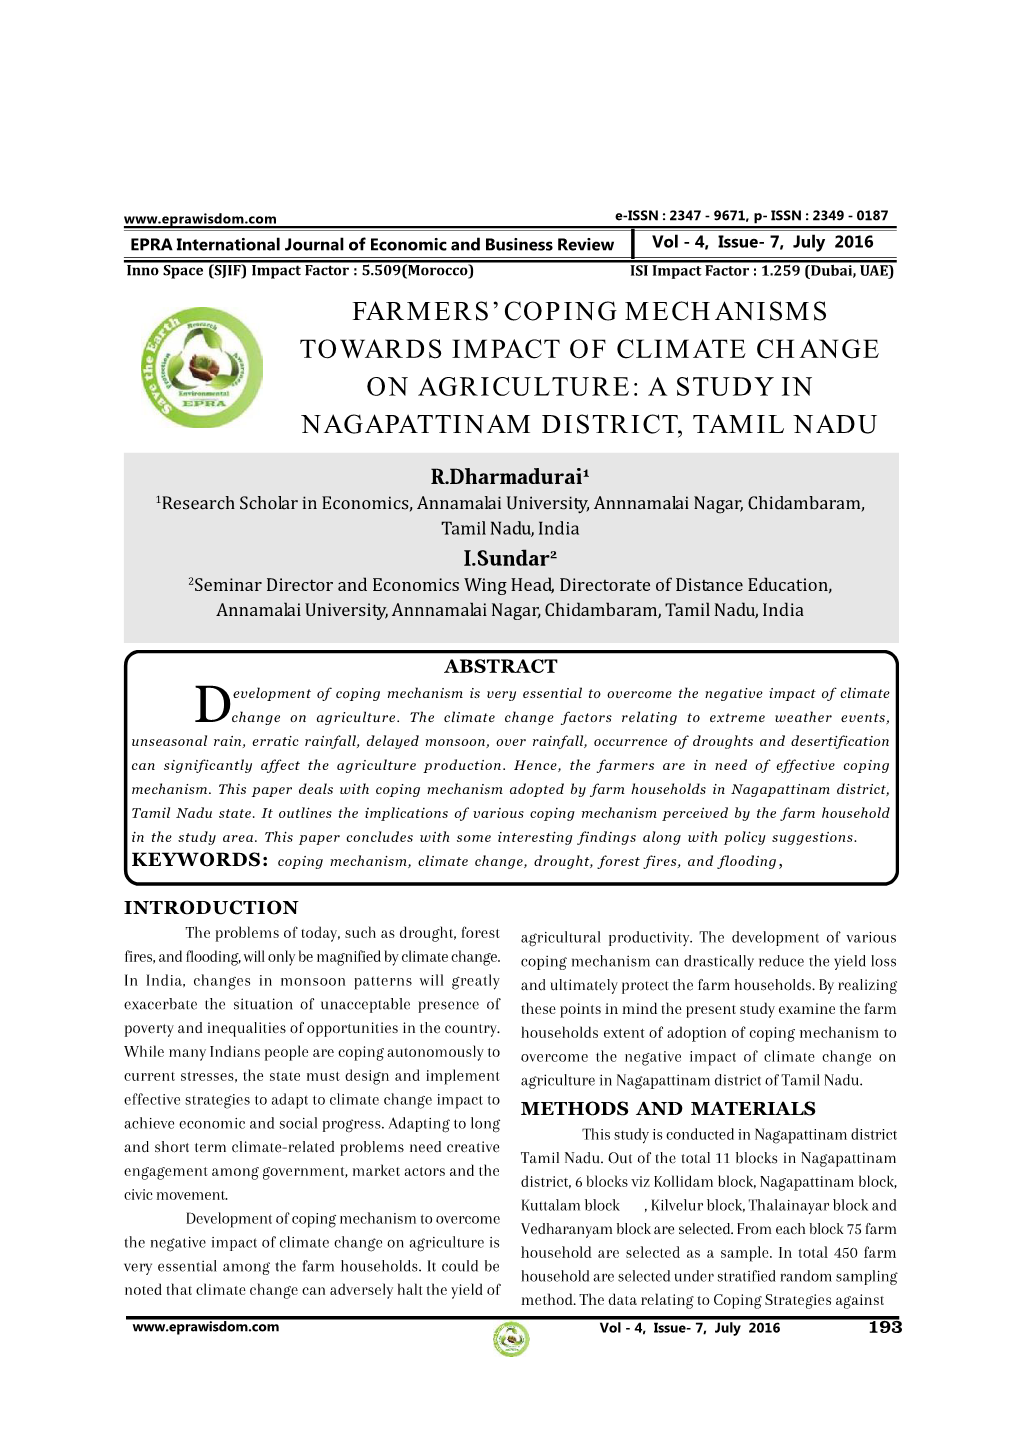 Farmers' Coping Mechanisms Towards Impact of Climate Change on Agriculture: a Study in Nagapattinam District, Tamil Nadu